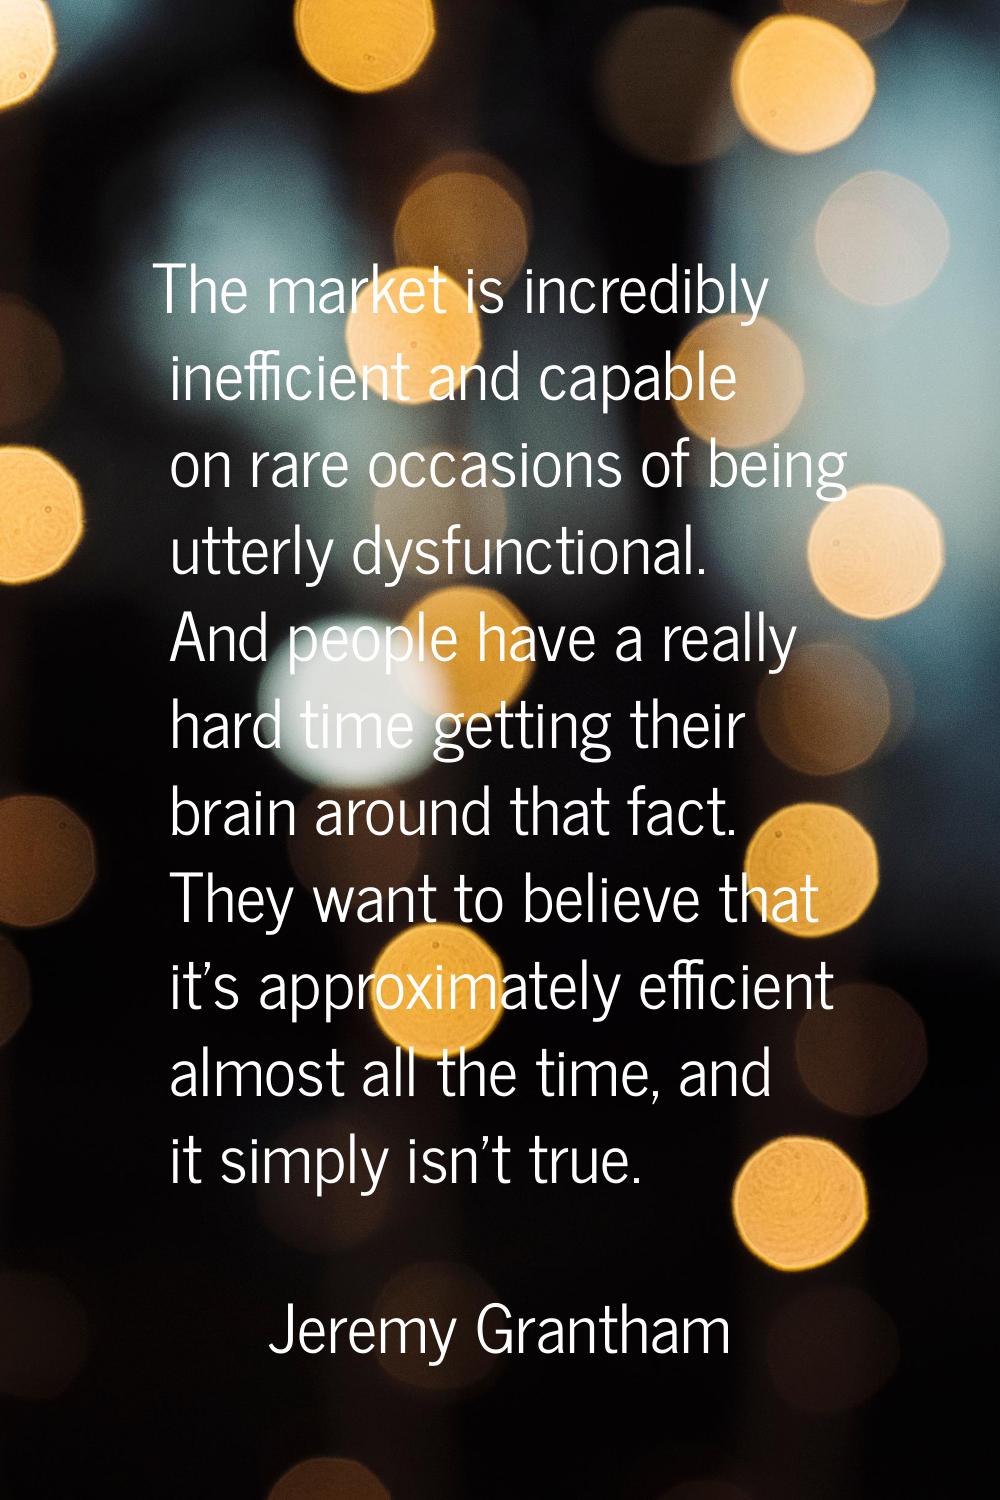 The market is incredibly inefficient and capable on rare occasions of being utterly dysfunctional. 